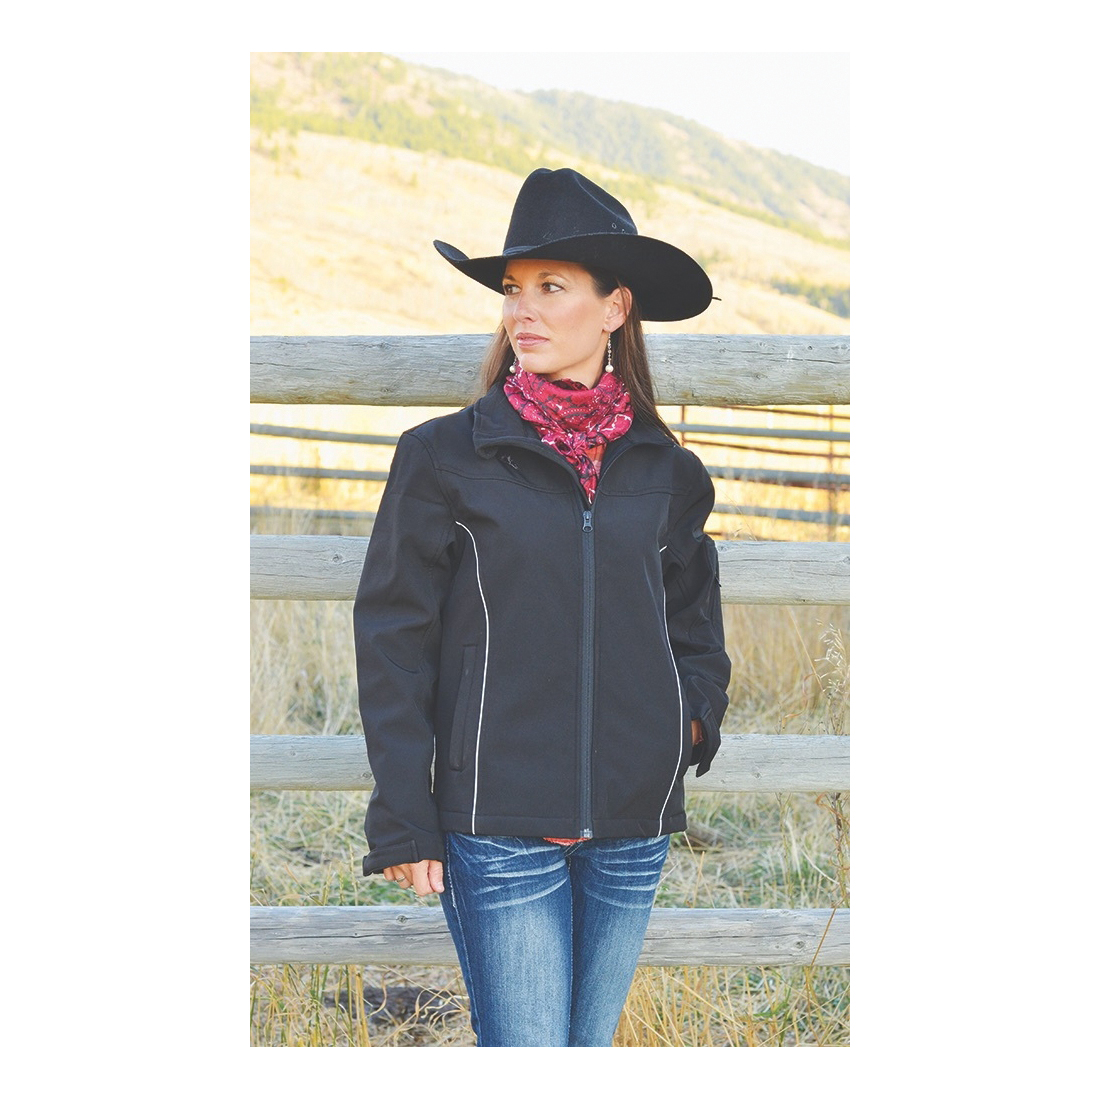 WYOMING TRADERS CHB-BLK-XL 103208099